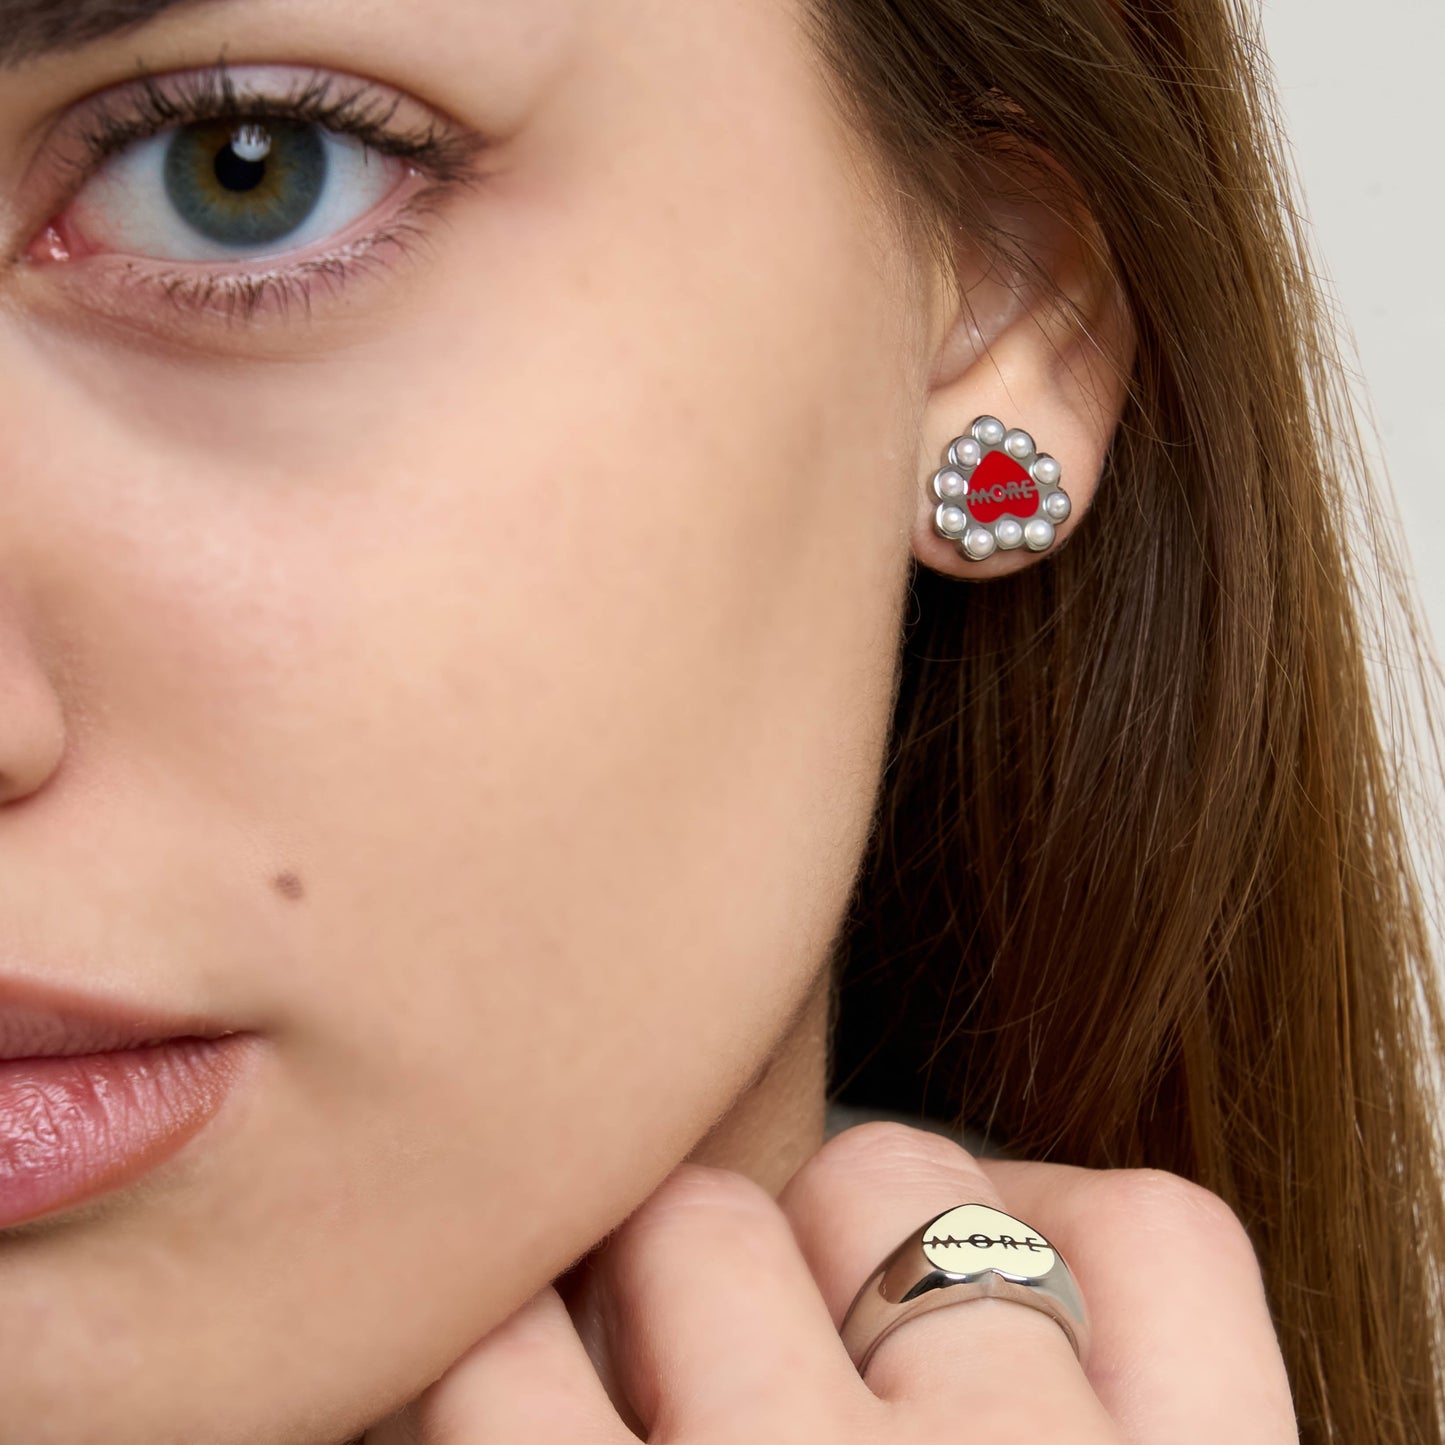 A-MORE - Red stud earrings with pearls